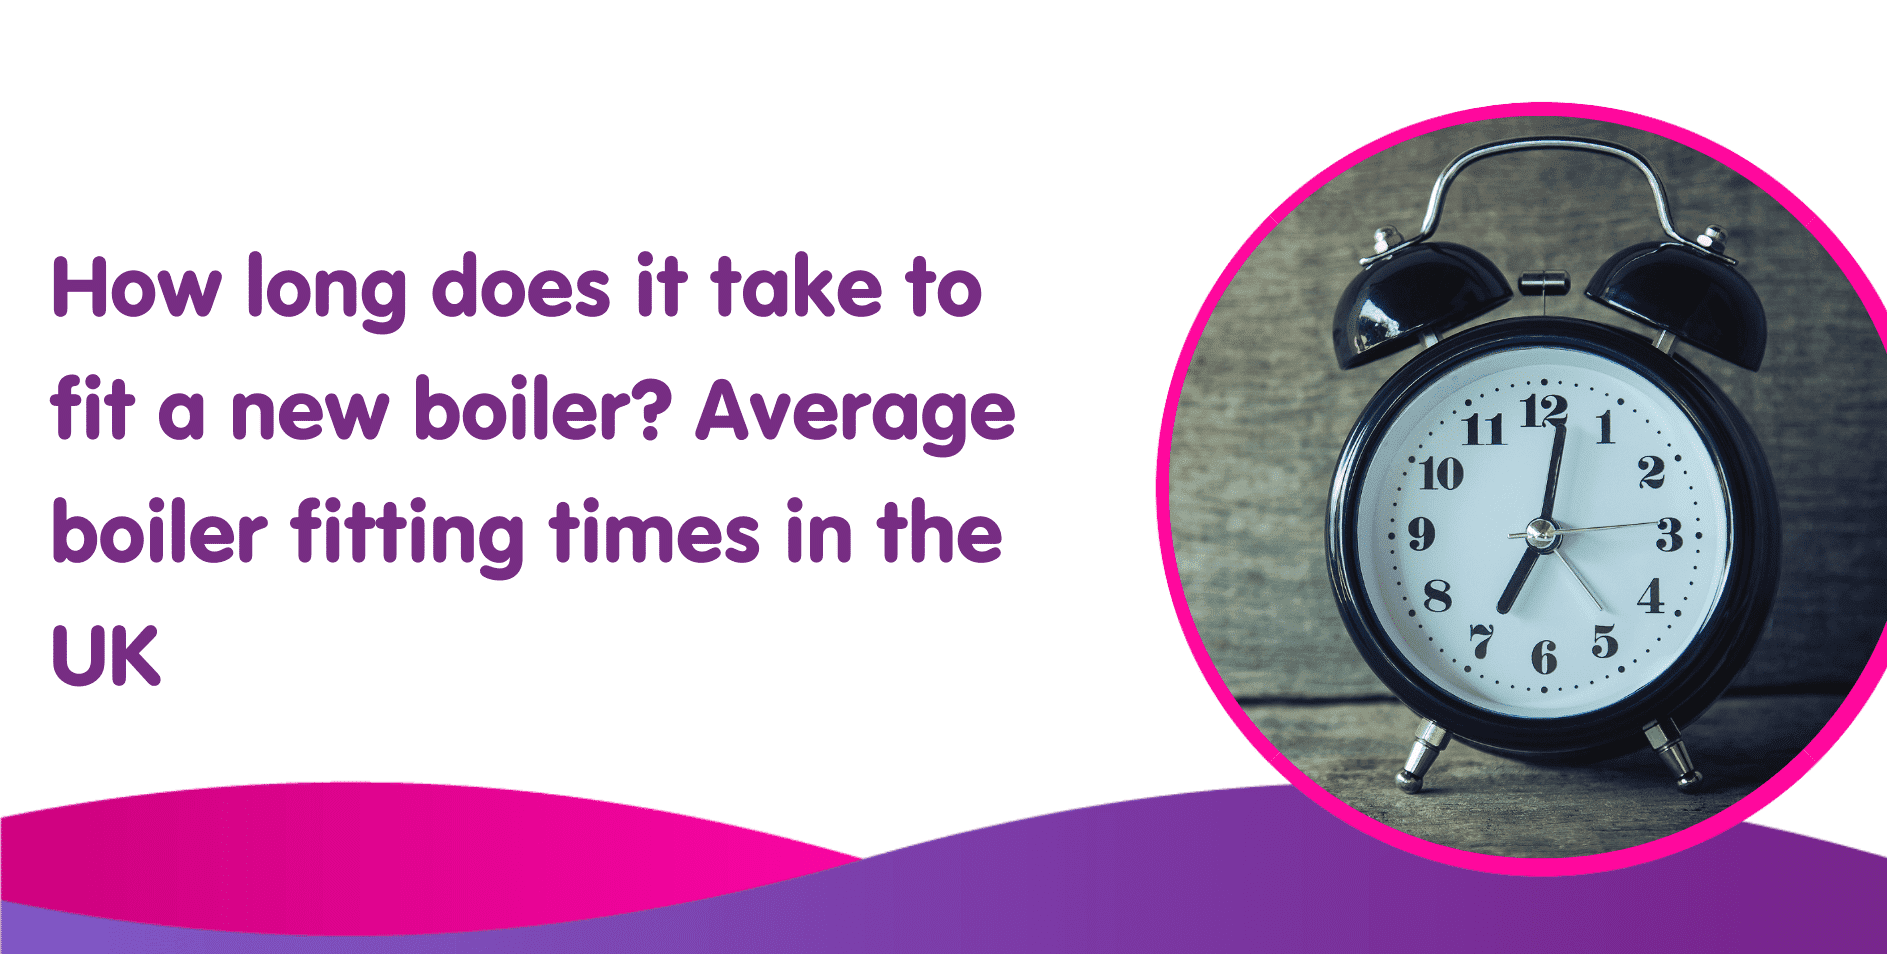 How long does it take to fit a new boiler? Average boiler fitting times in the UK